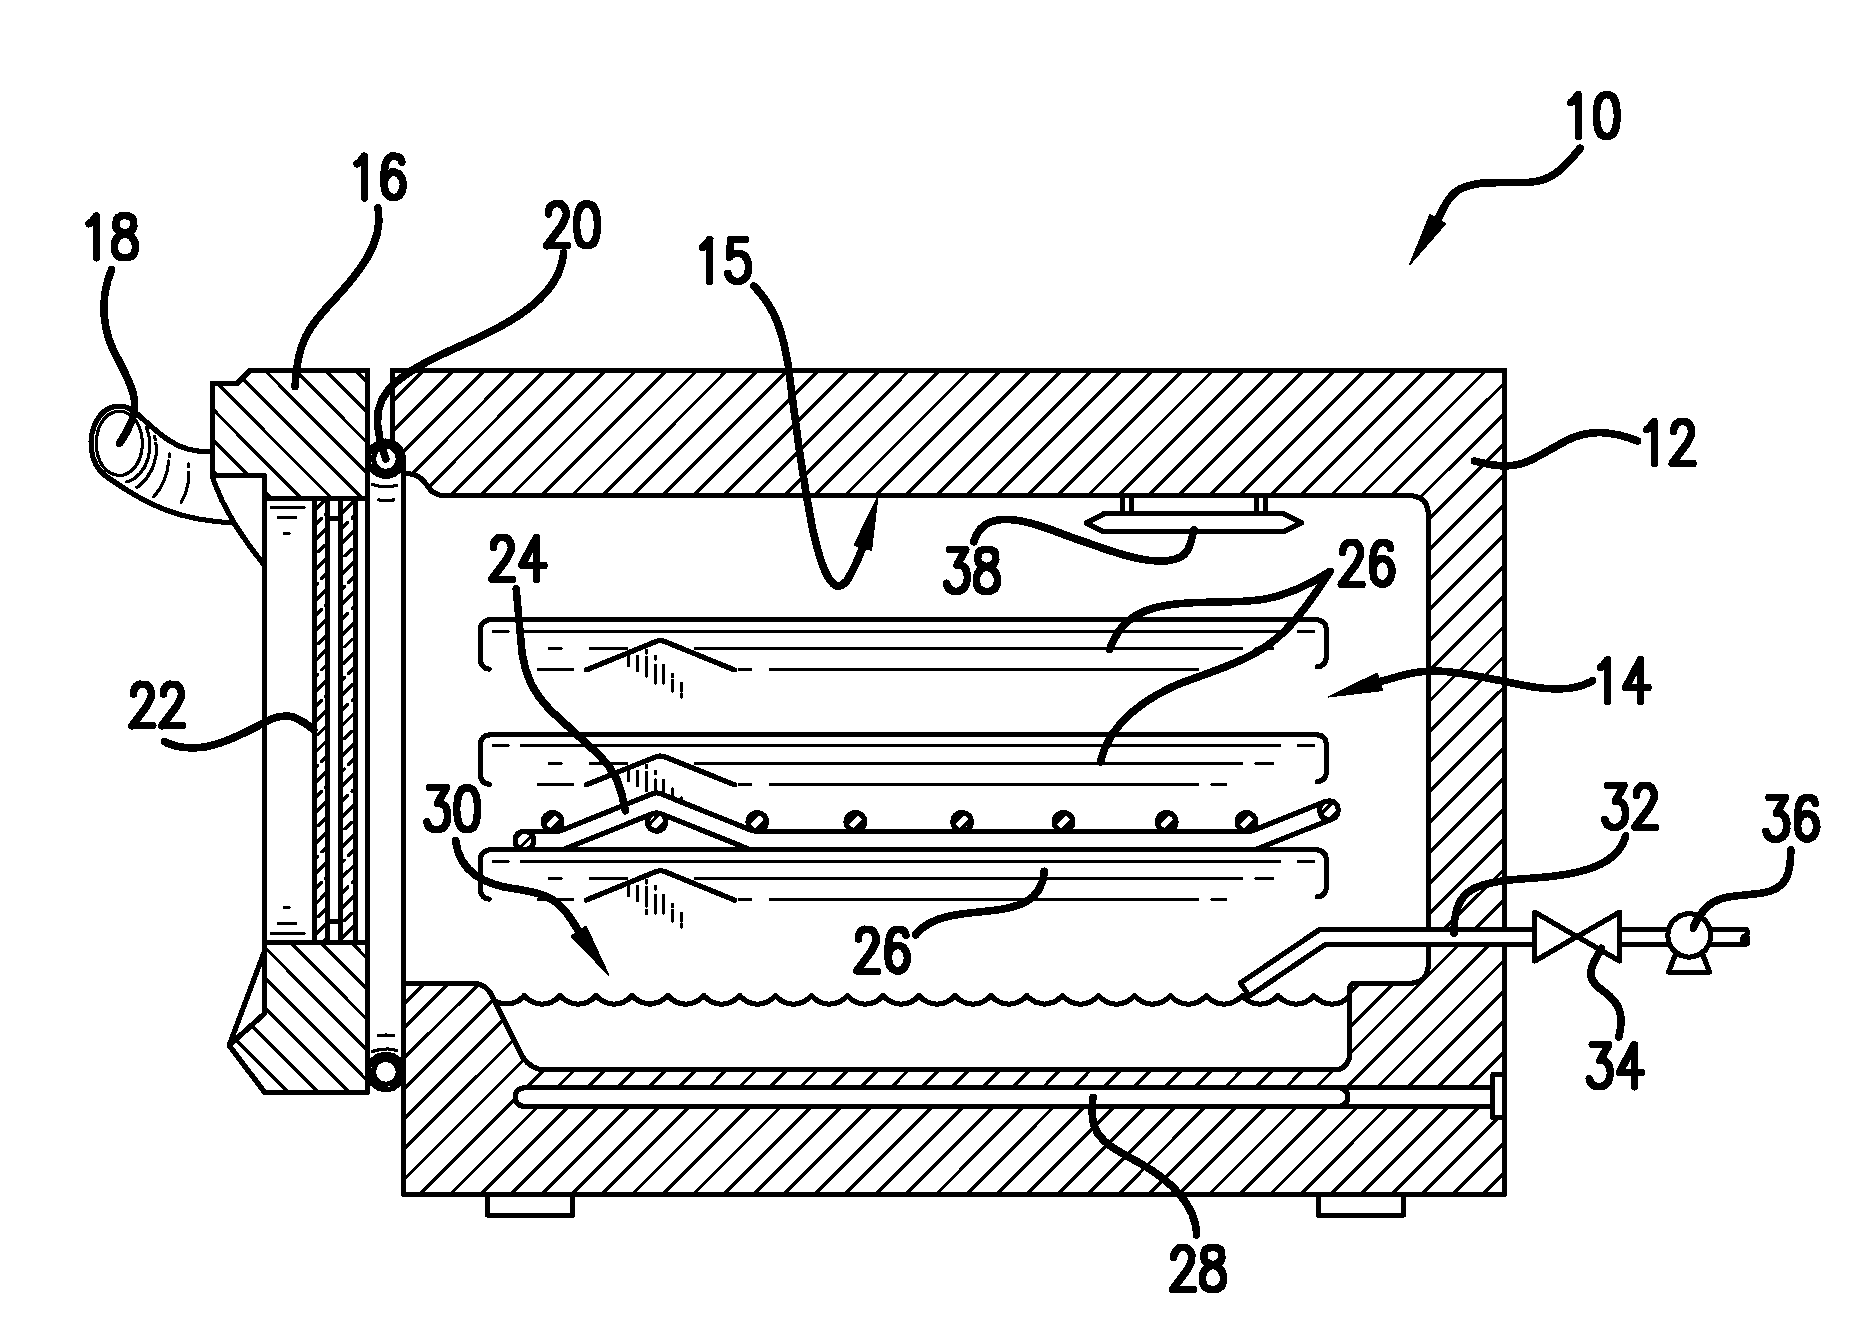 Oven appliance cleaning system using heat and steam cycle